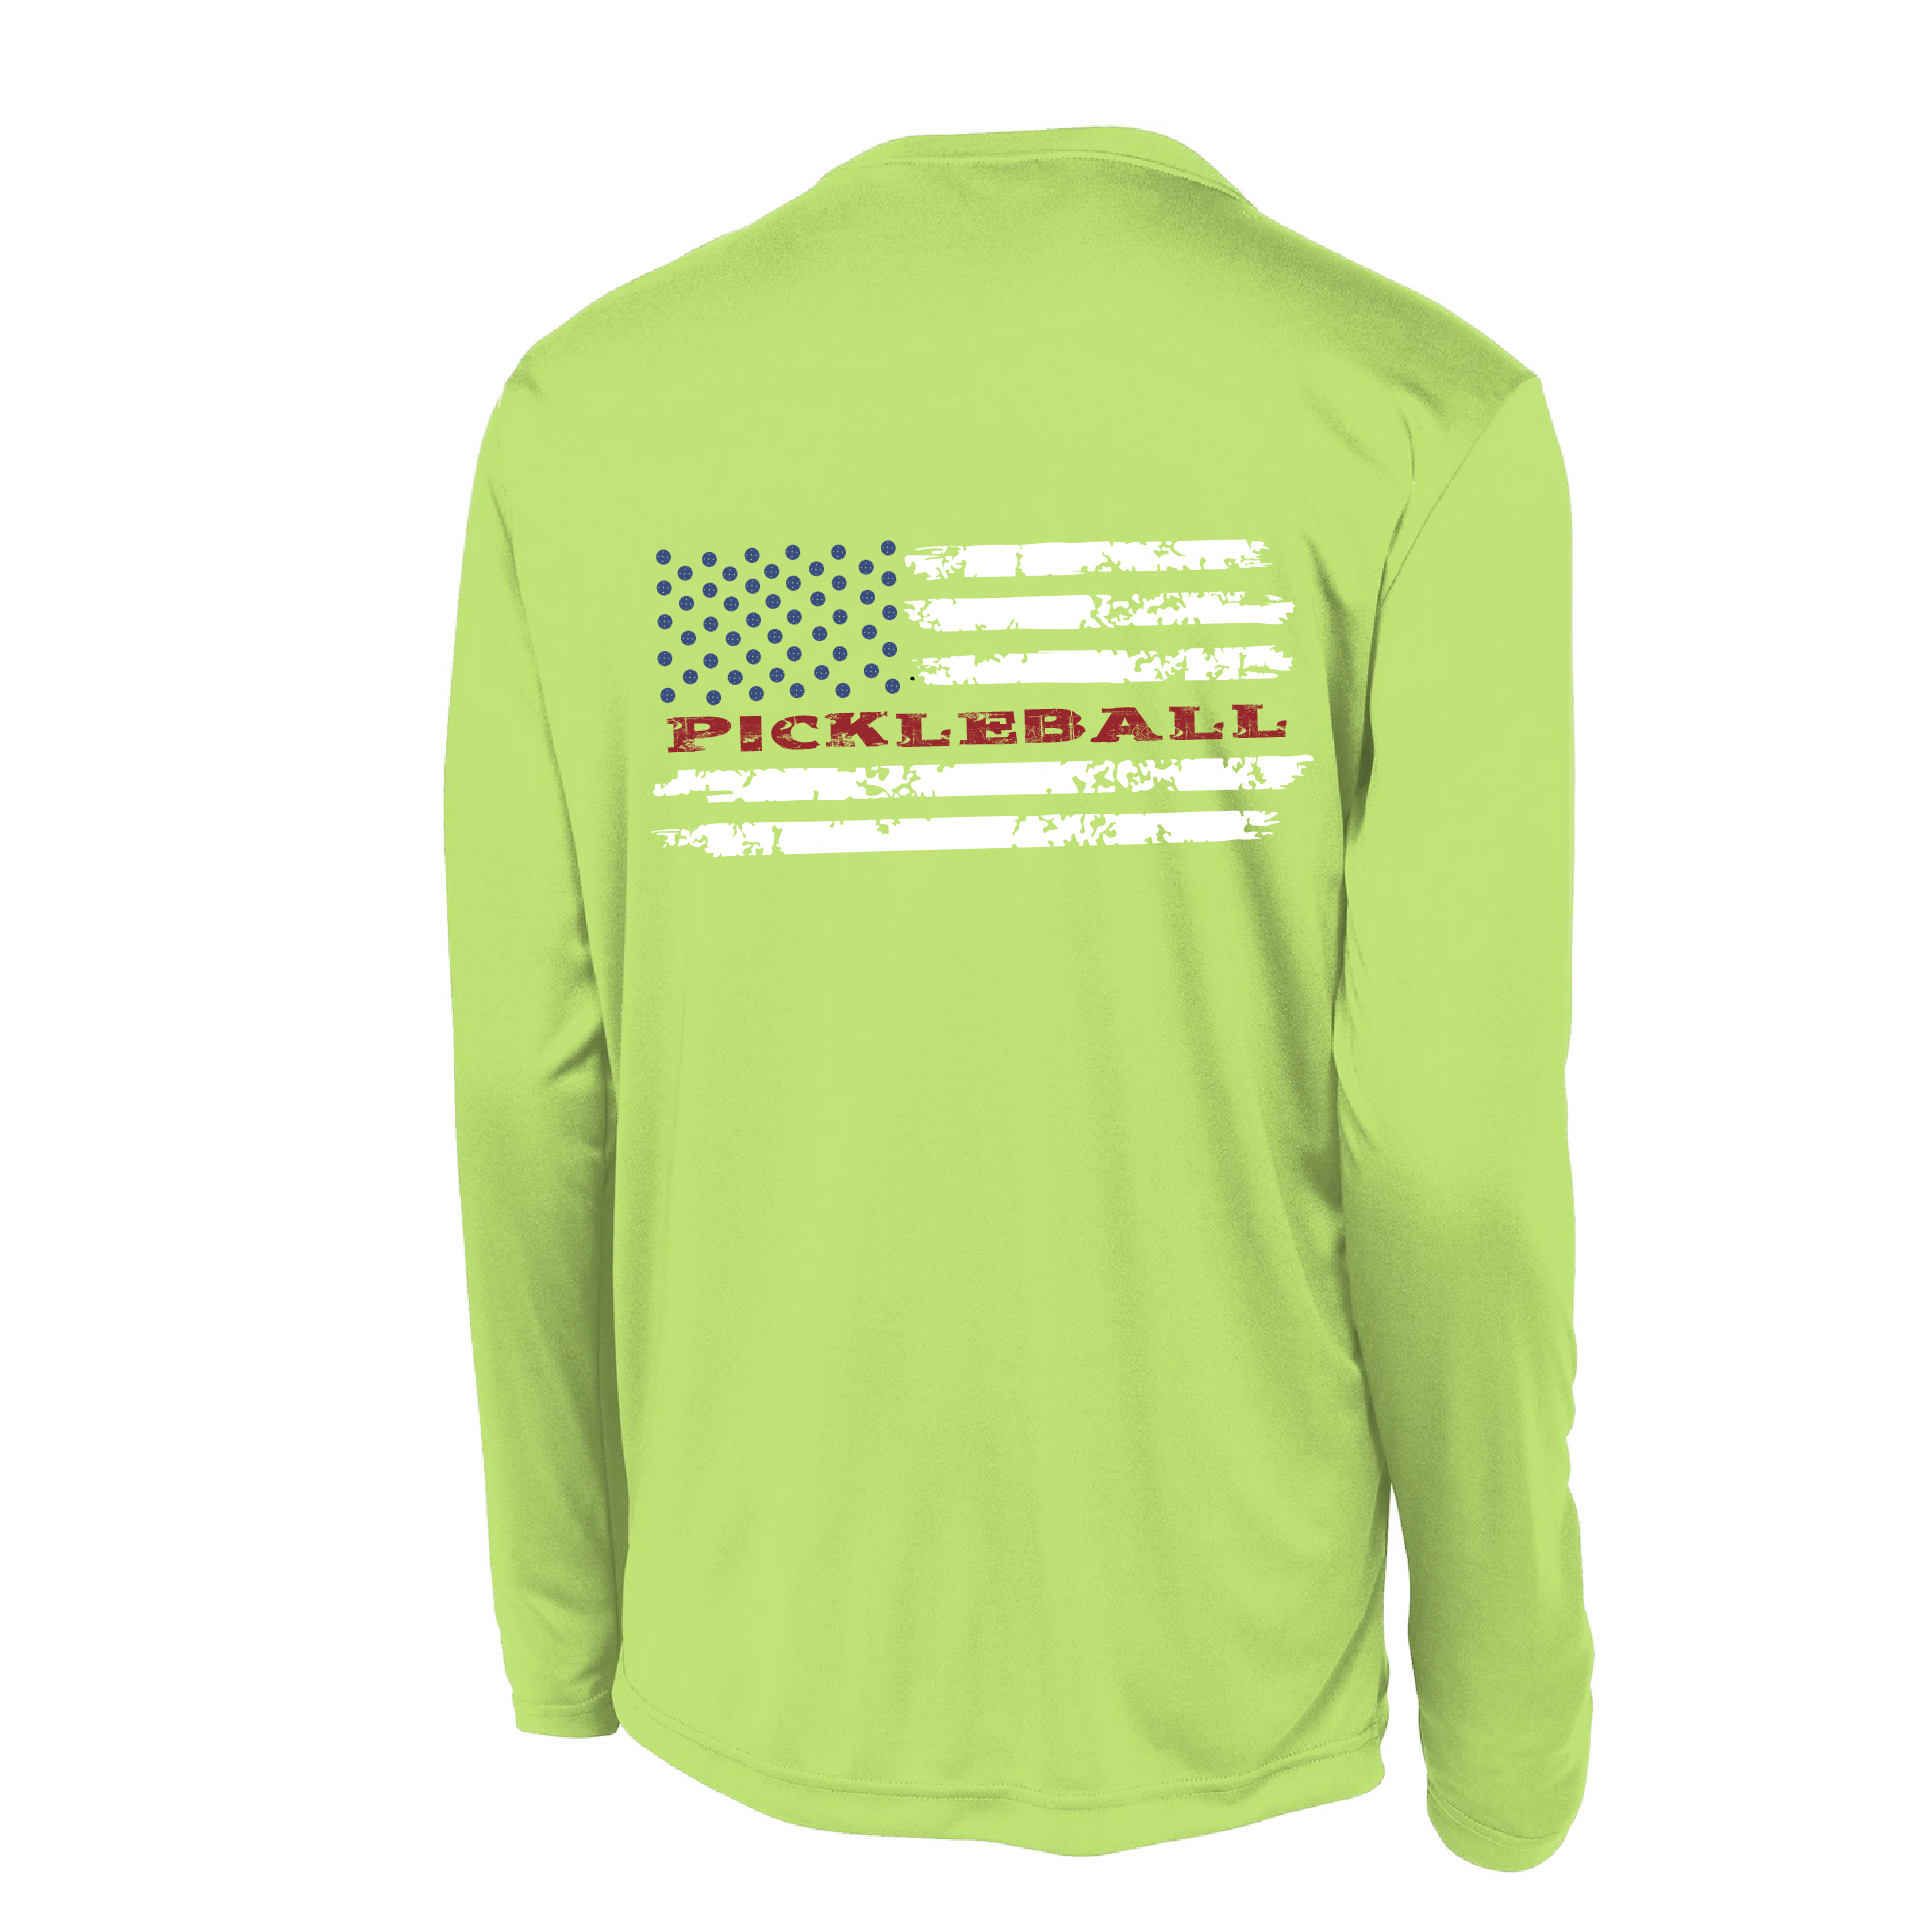 Pickleball Design: Pickleball Horizontal Flag on Front or Back Shirt  Men's Styles: Long-Sleeve  Shirts are lightweight, roomy and highly breathable. These moisture-wicking shirts are designed for athletic performance. They feature PosiCharge technology to lock in color and prevent logos from fading. Removable tag and set-in sleeves for comfort.